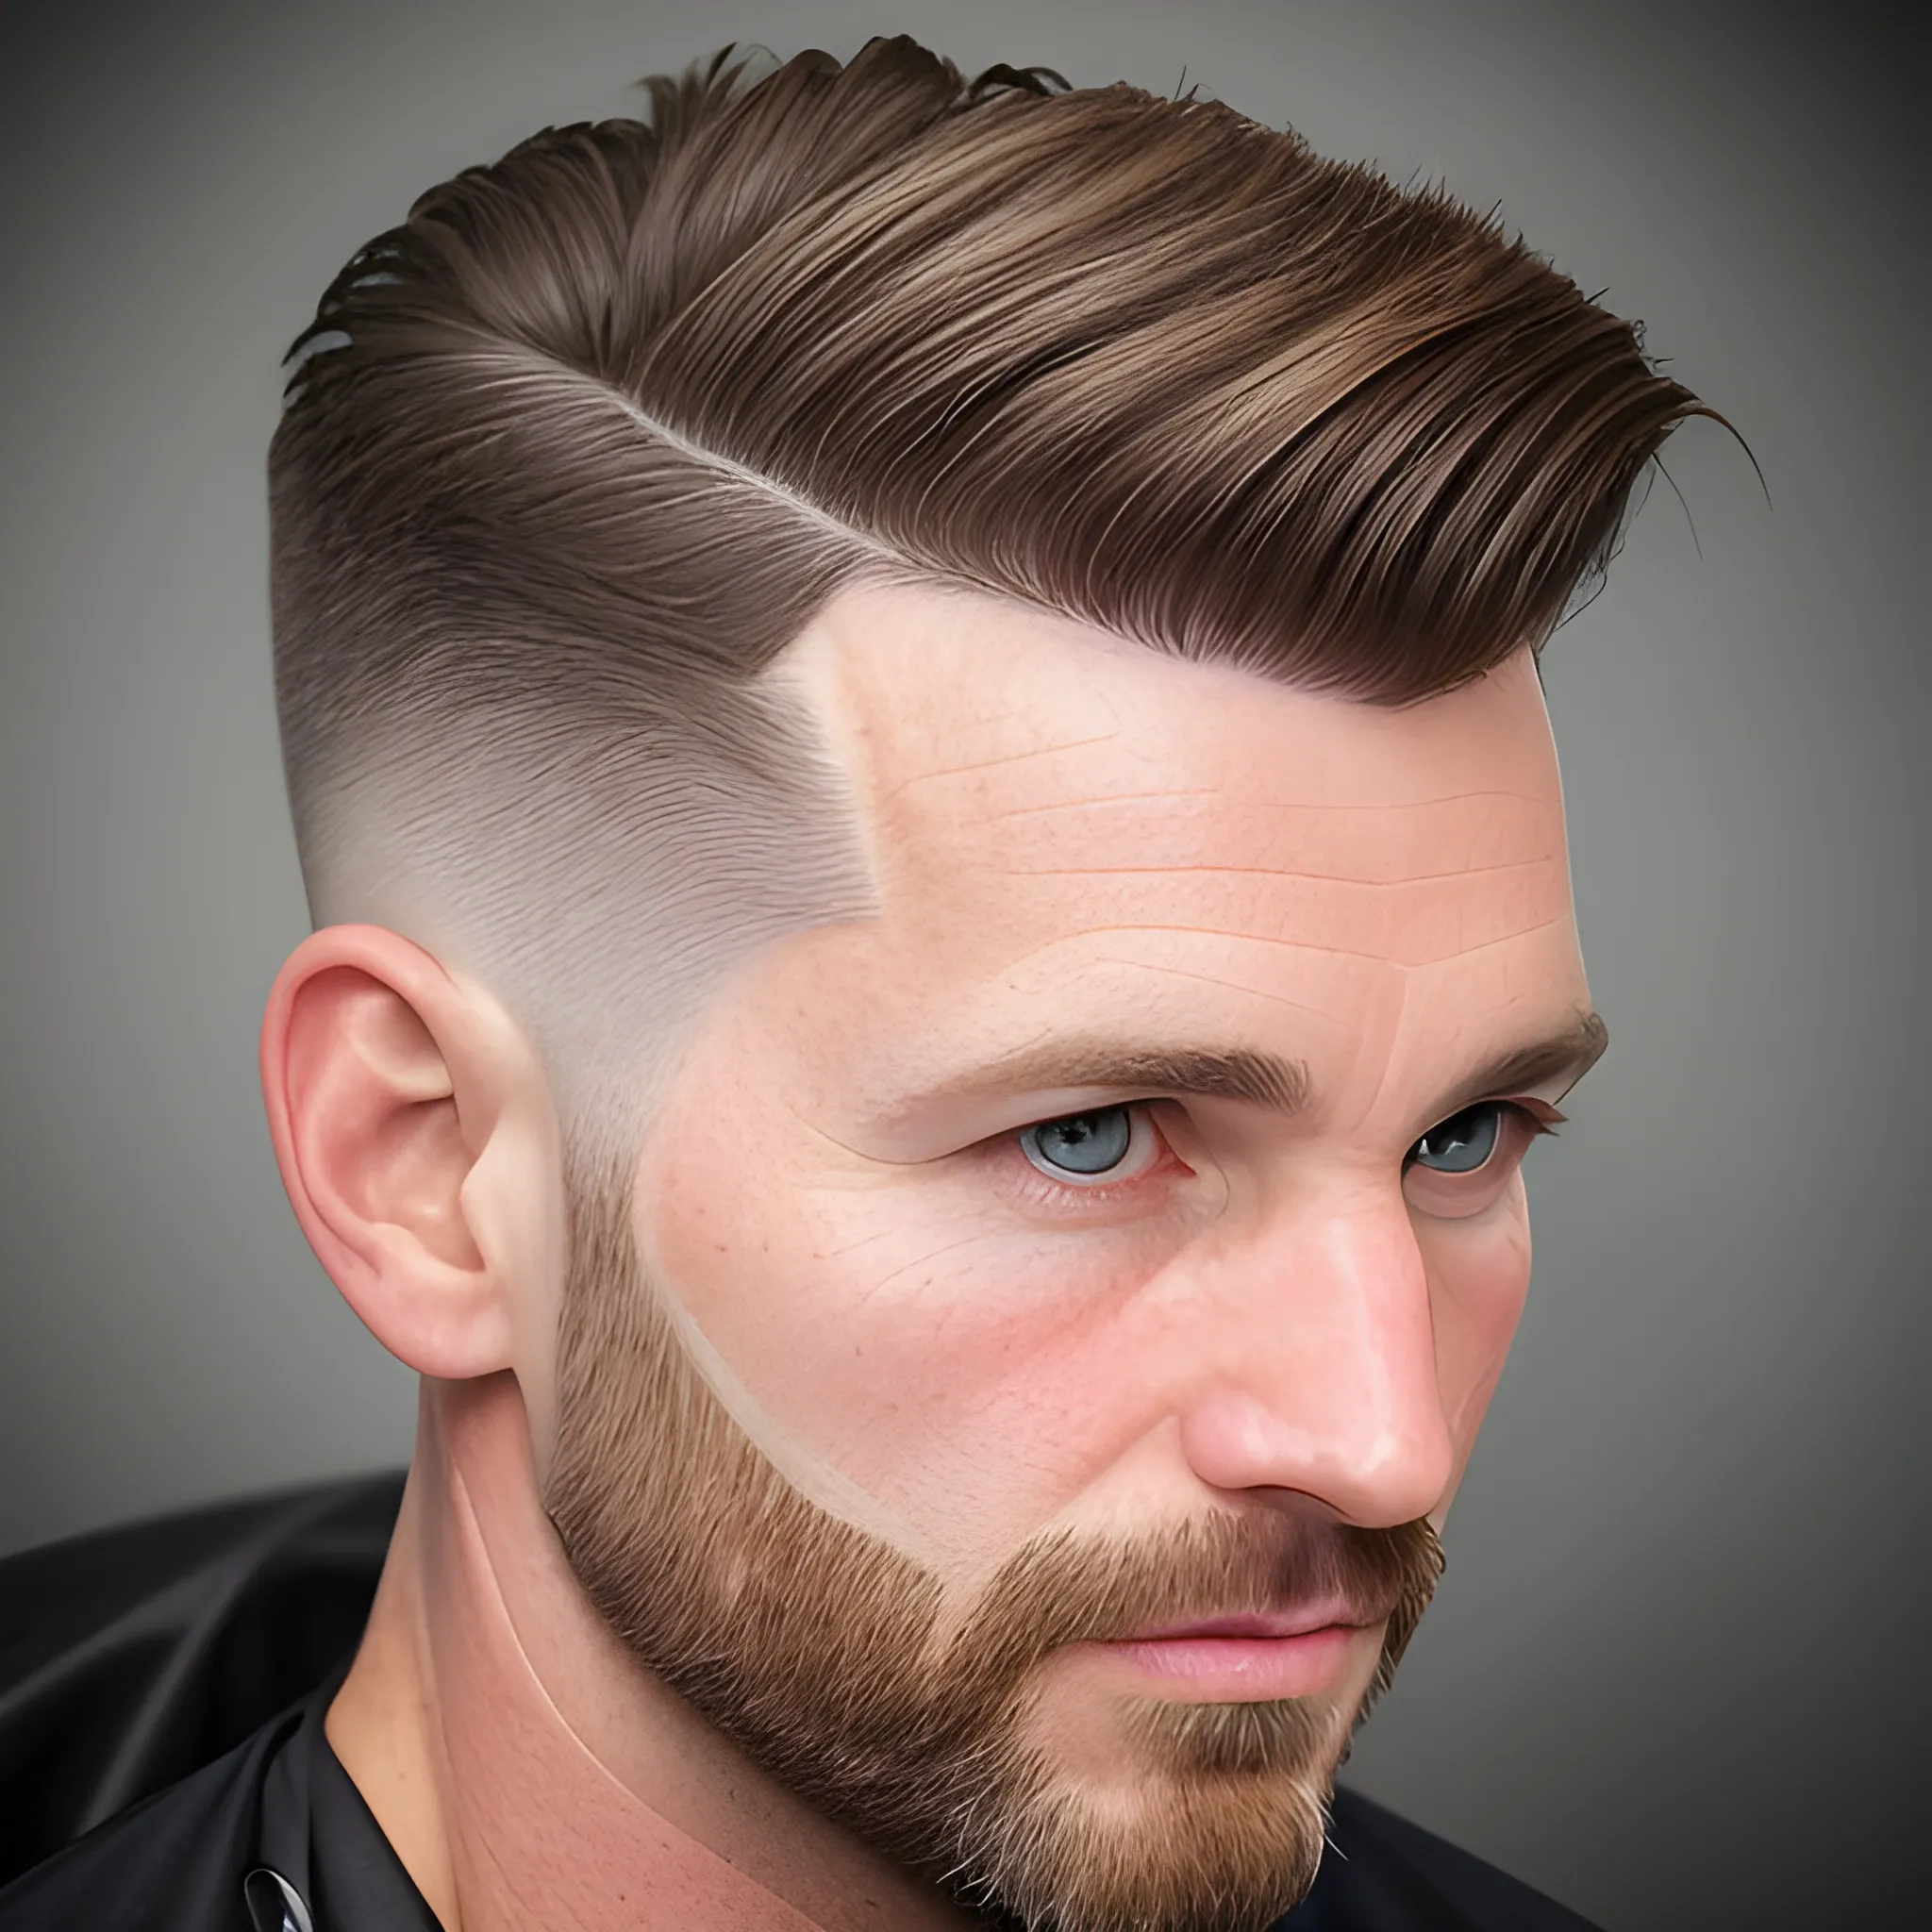 Portrait of 40 year old Caucasian male of German and Scottish ancestry with very short brown hair coming to a peak in front with high fade for haircut with egg shaped head and no facial hair.